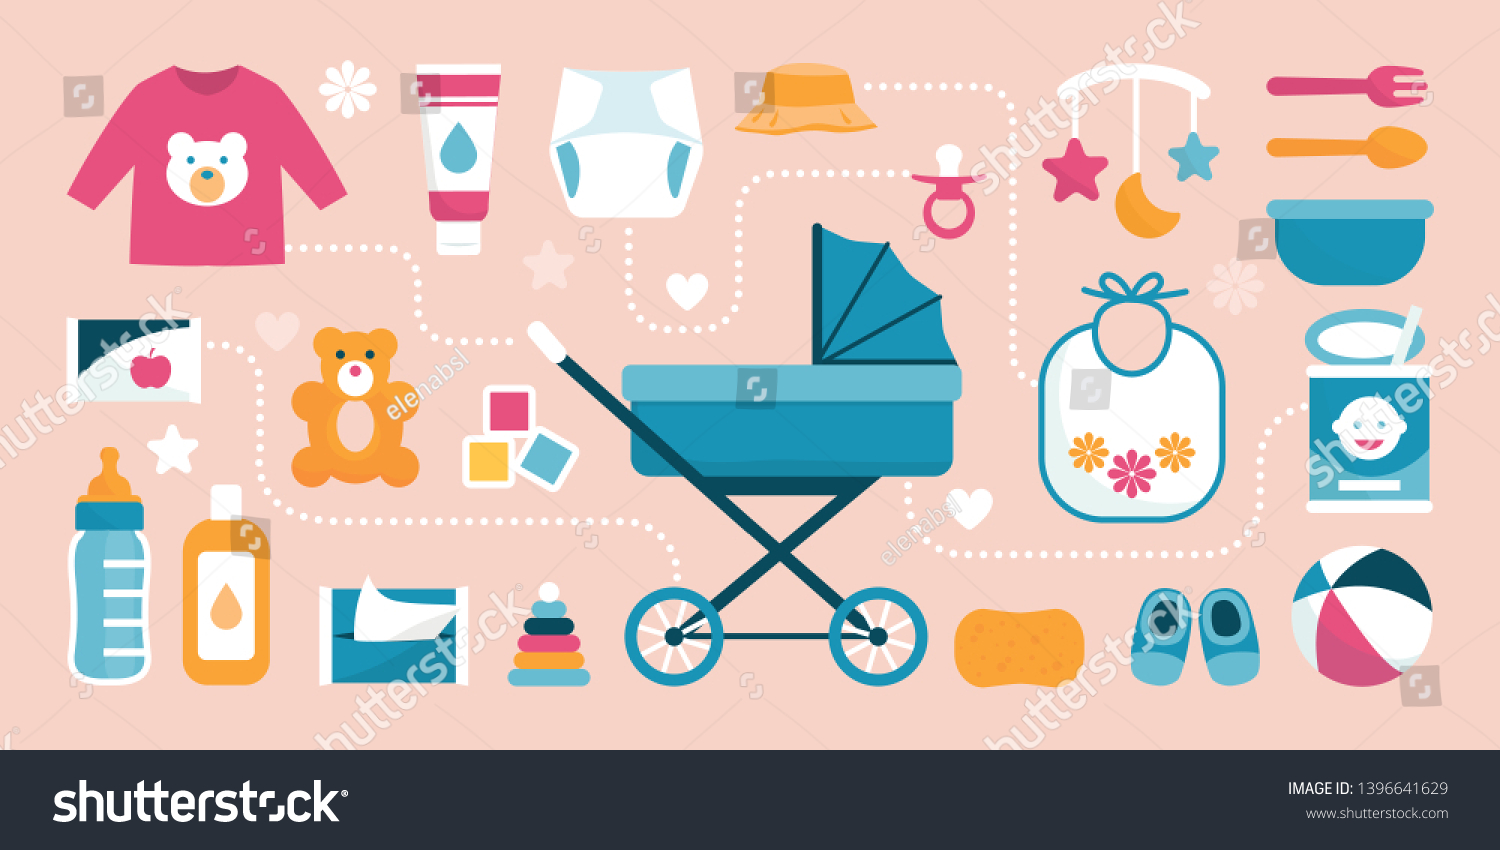 SVG of Newborn baby care accessories and items, baby carriage at center: maternity and childhood concept svg